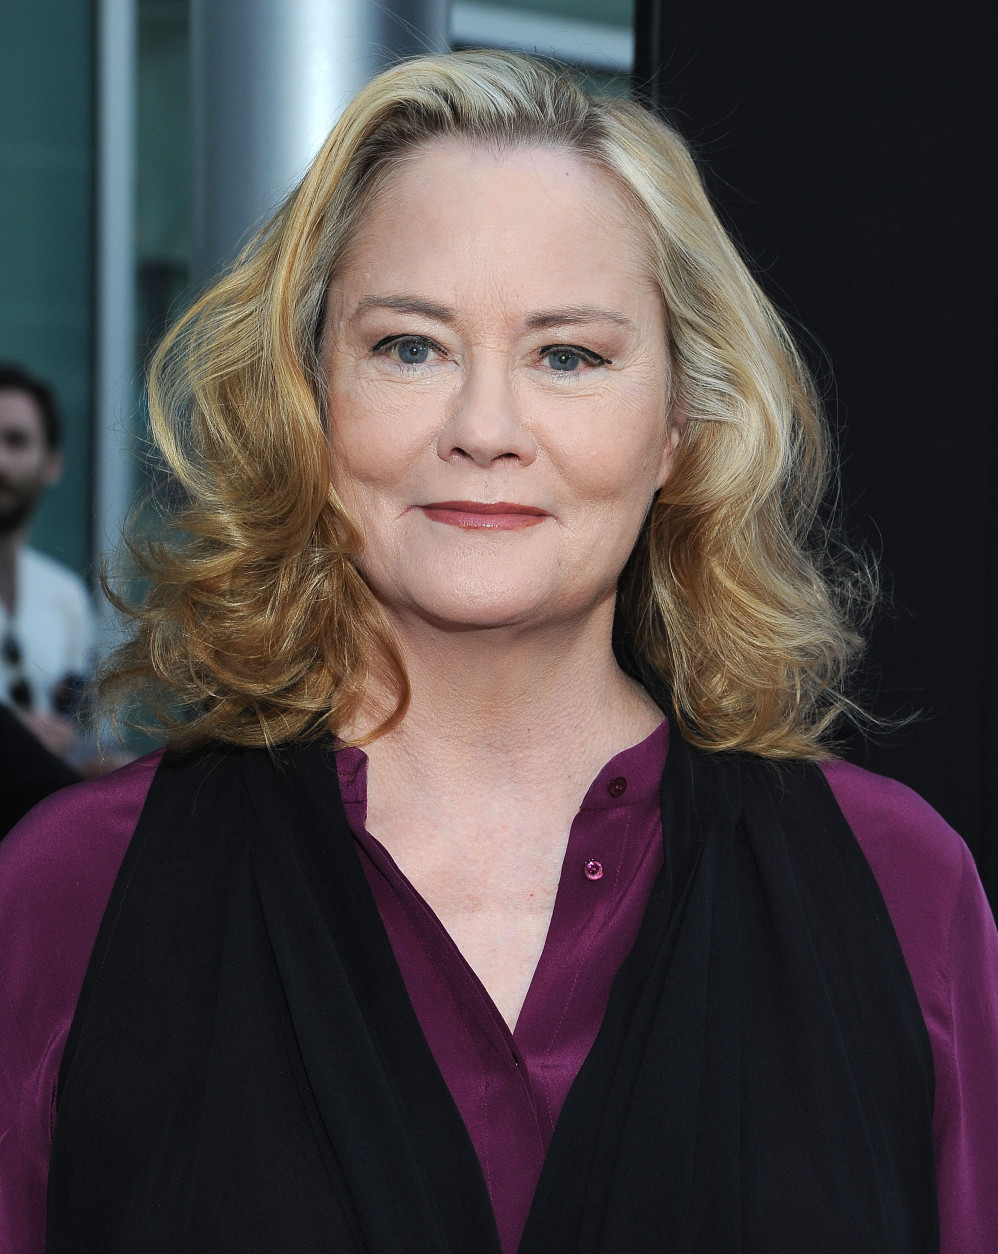 HOLLYWOOD, CA - MARCH 16:  Actress Cybill Shepherd attends the Premiere of Pure Flix's "Do You Believe?" at ArcLight Hollywood on March 16, 2015 in Hollywood, California.  (Photo by Angela Weiss/Getty Images)